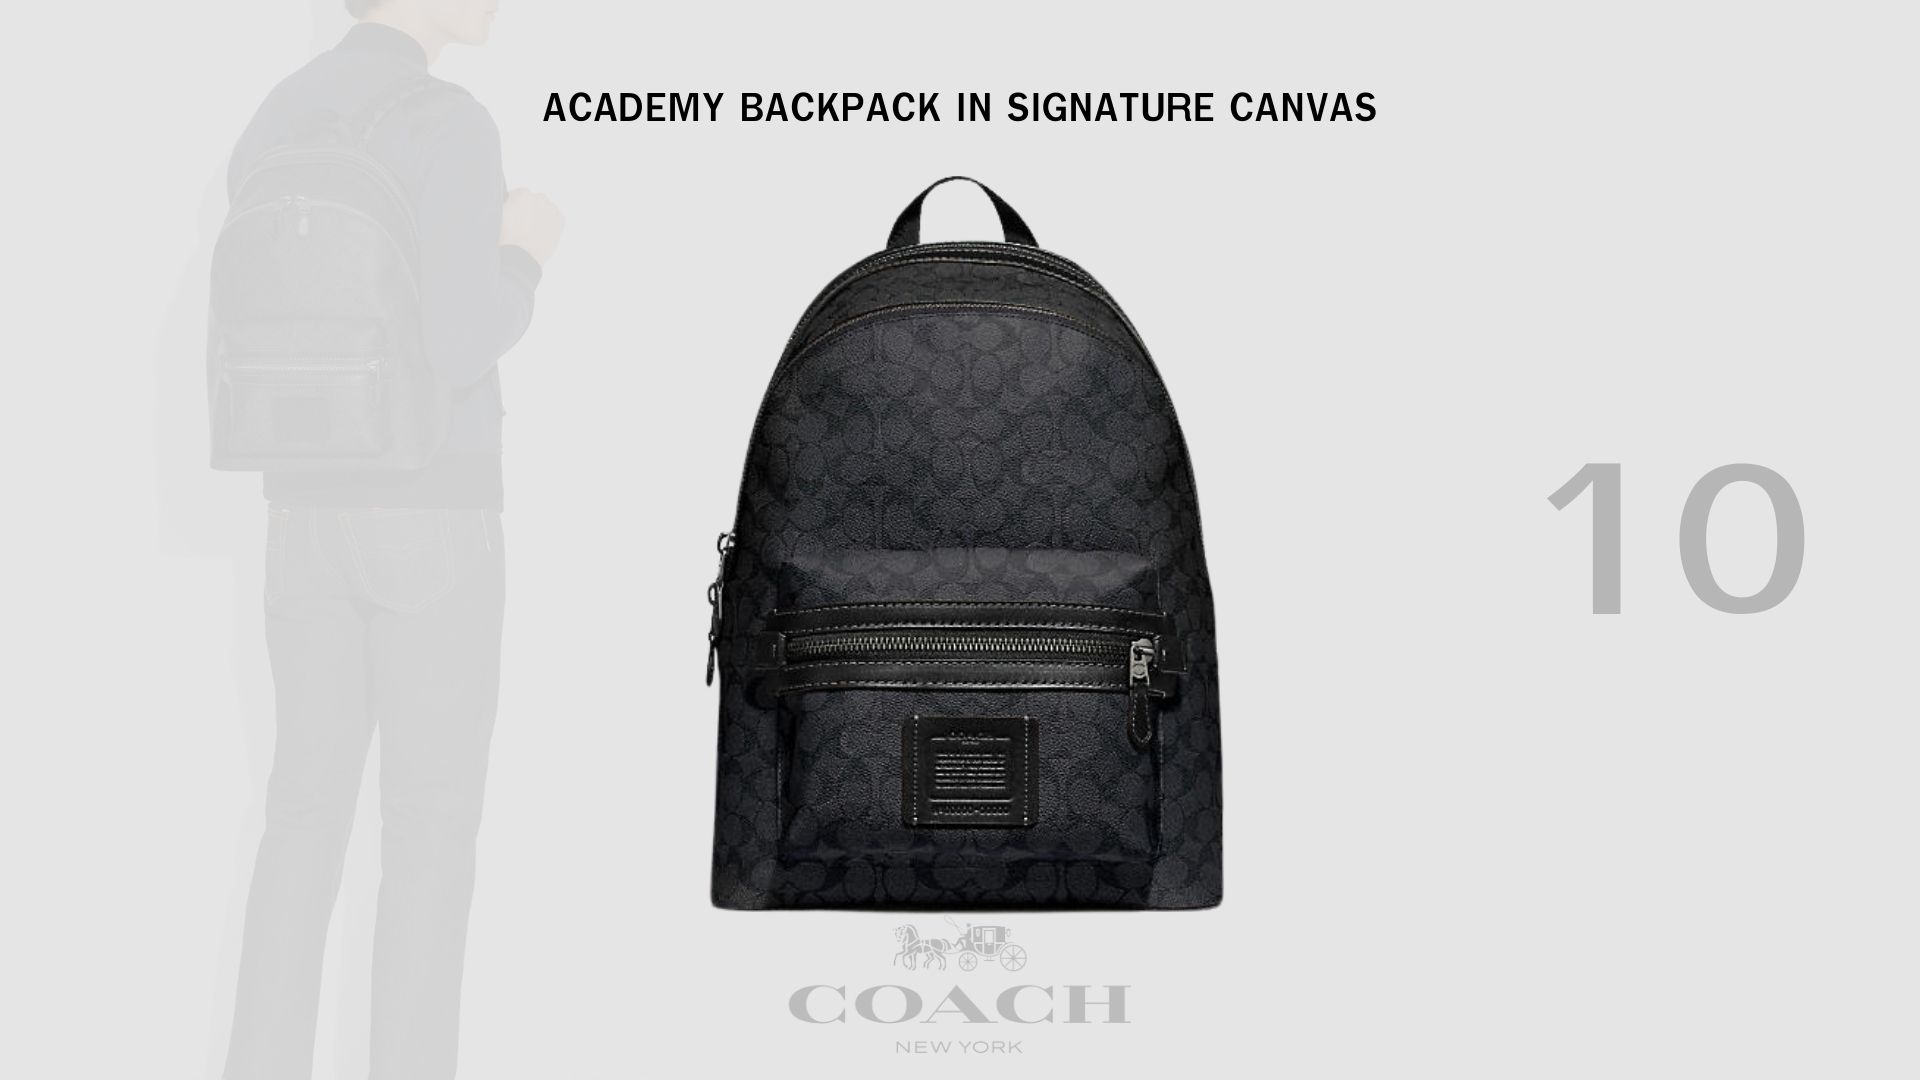 ACADEMY BACKPACK IN SIGNATURE CANVAS